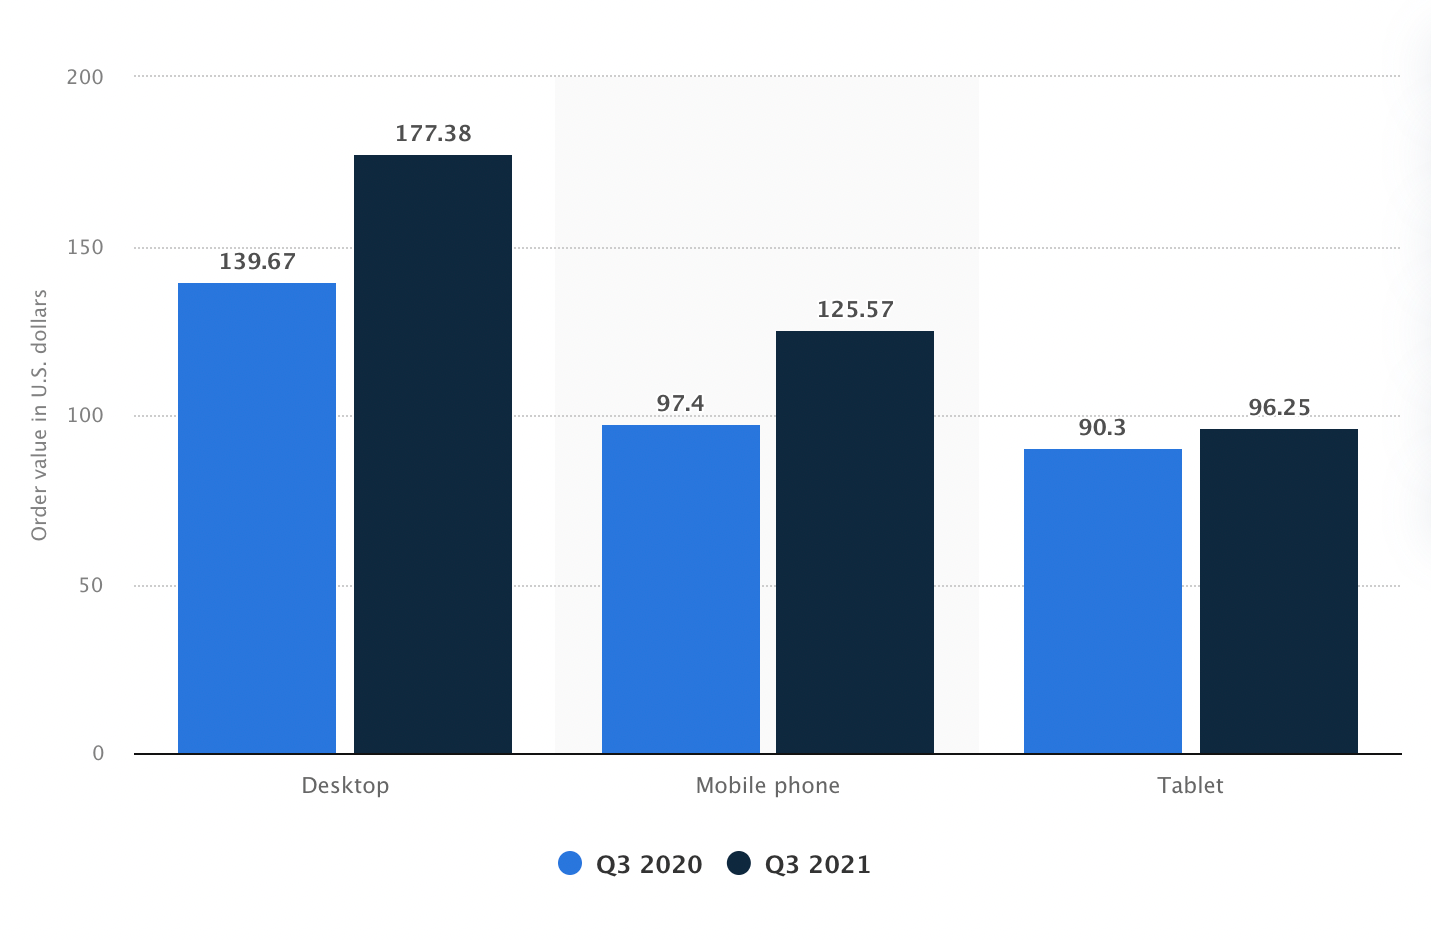 Average value of US online shopping orders, Q3 2020 and Q3 2021